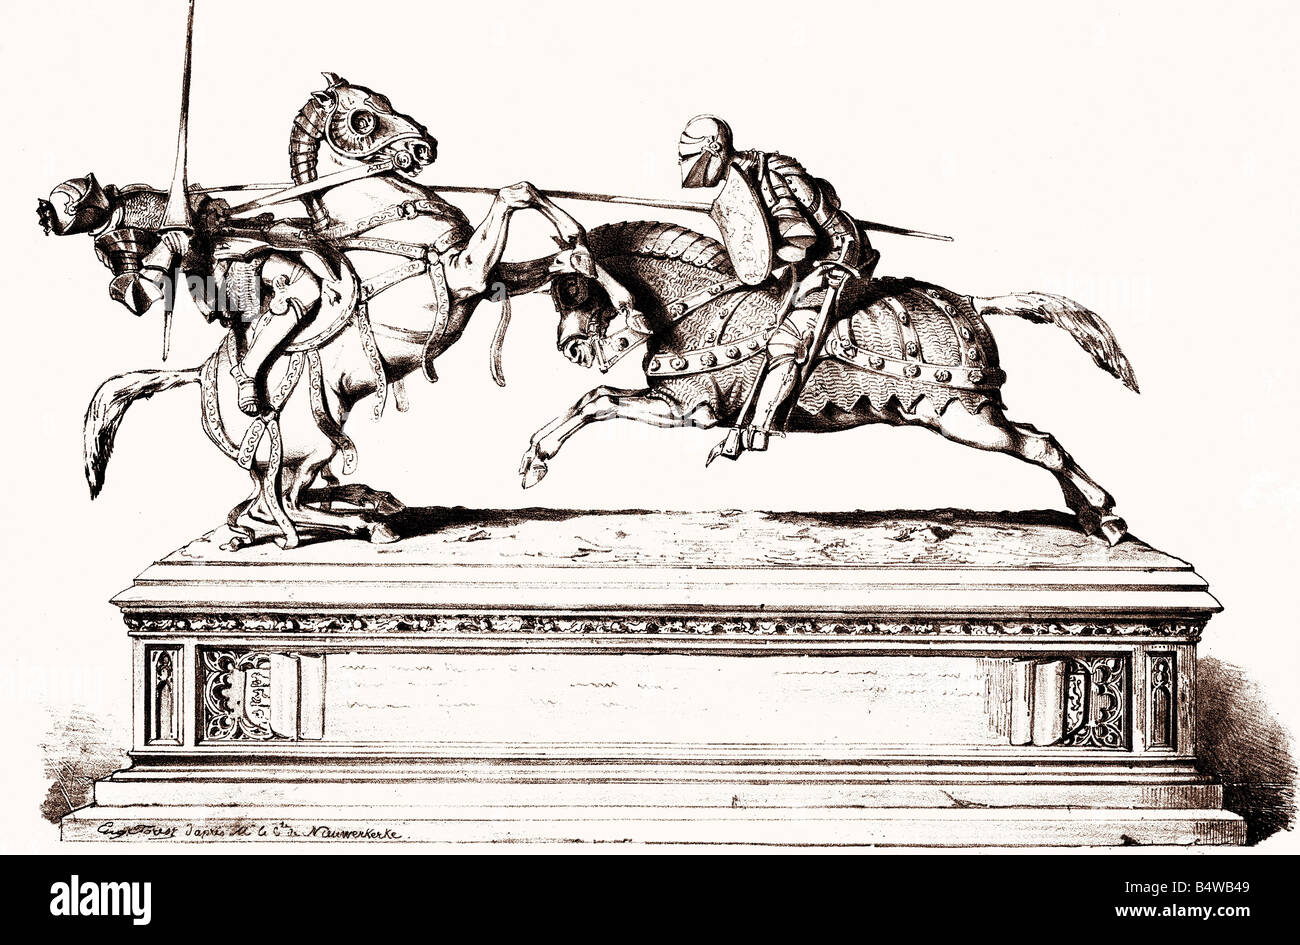 Thomas of Lancaster, 29.9.1388 - 22. 3.1421, 1st Duke of Clarence, death in the battle of Bauge, steel engraving after sculpture, 19th century, , Artist's Copyright has not to be cleared Stock Photo